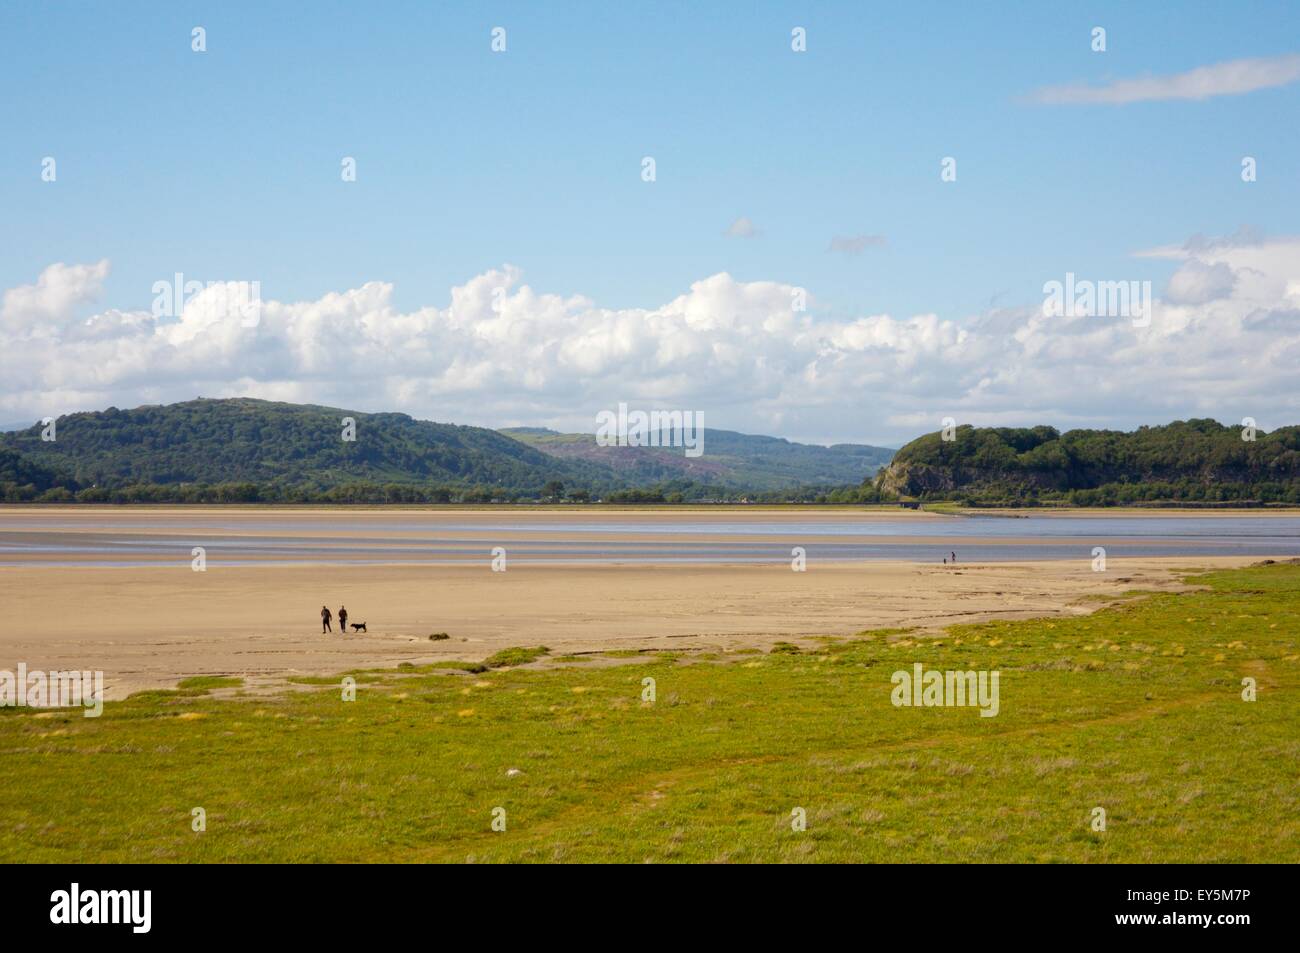 walkers on sands of Morecambe Bay at Arnside, Cumbria, looking towards Lake District hills Stock Photo